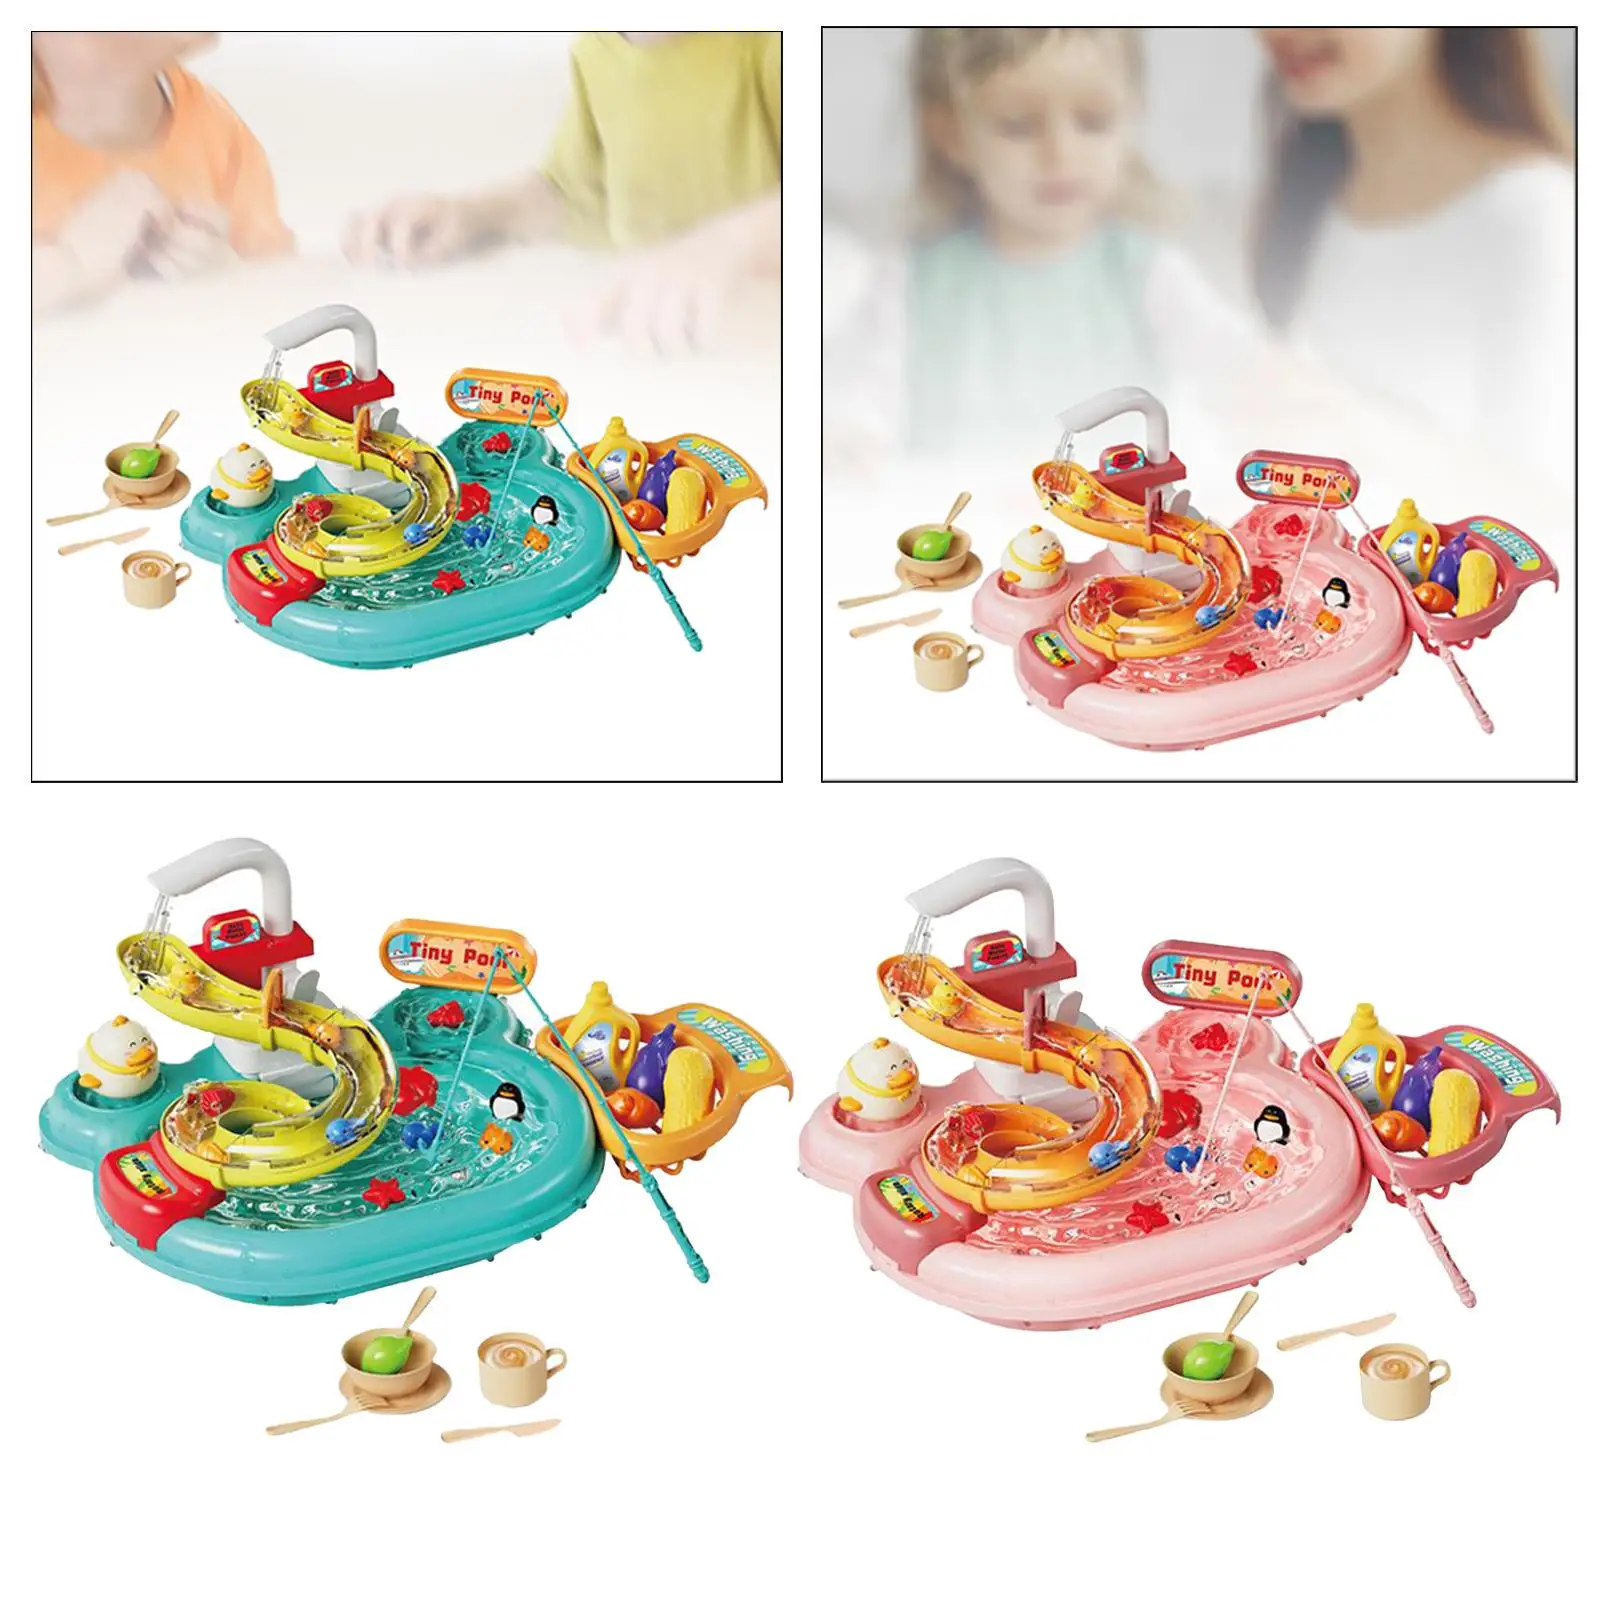 Kids Play Kitchen Sink Toy Playing Toy Automatic Faucet Children Playing Toy for Play House Kitchen Children Gift